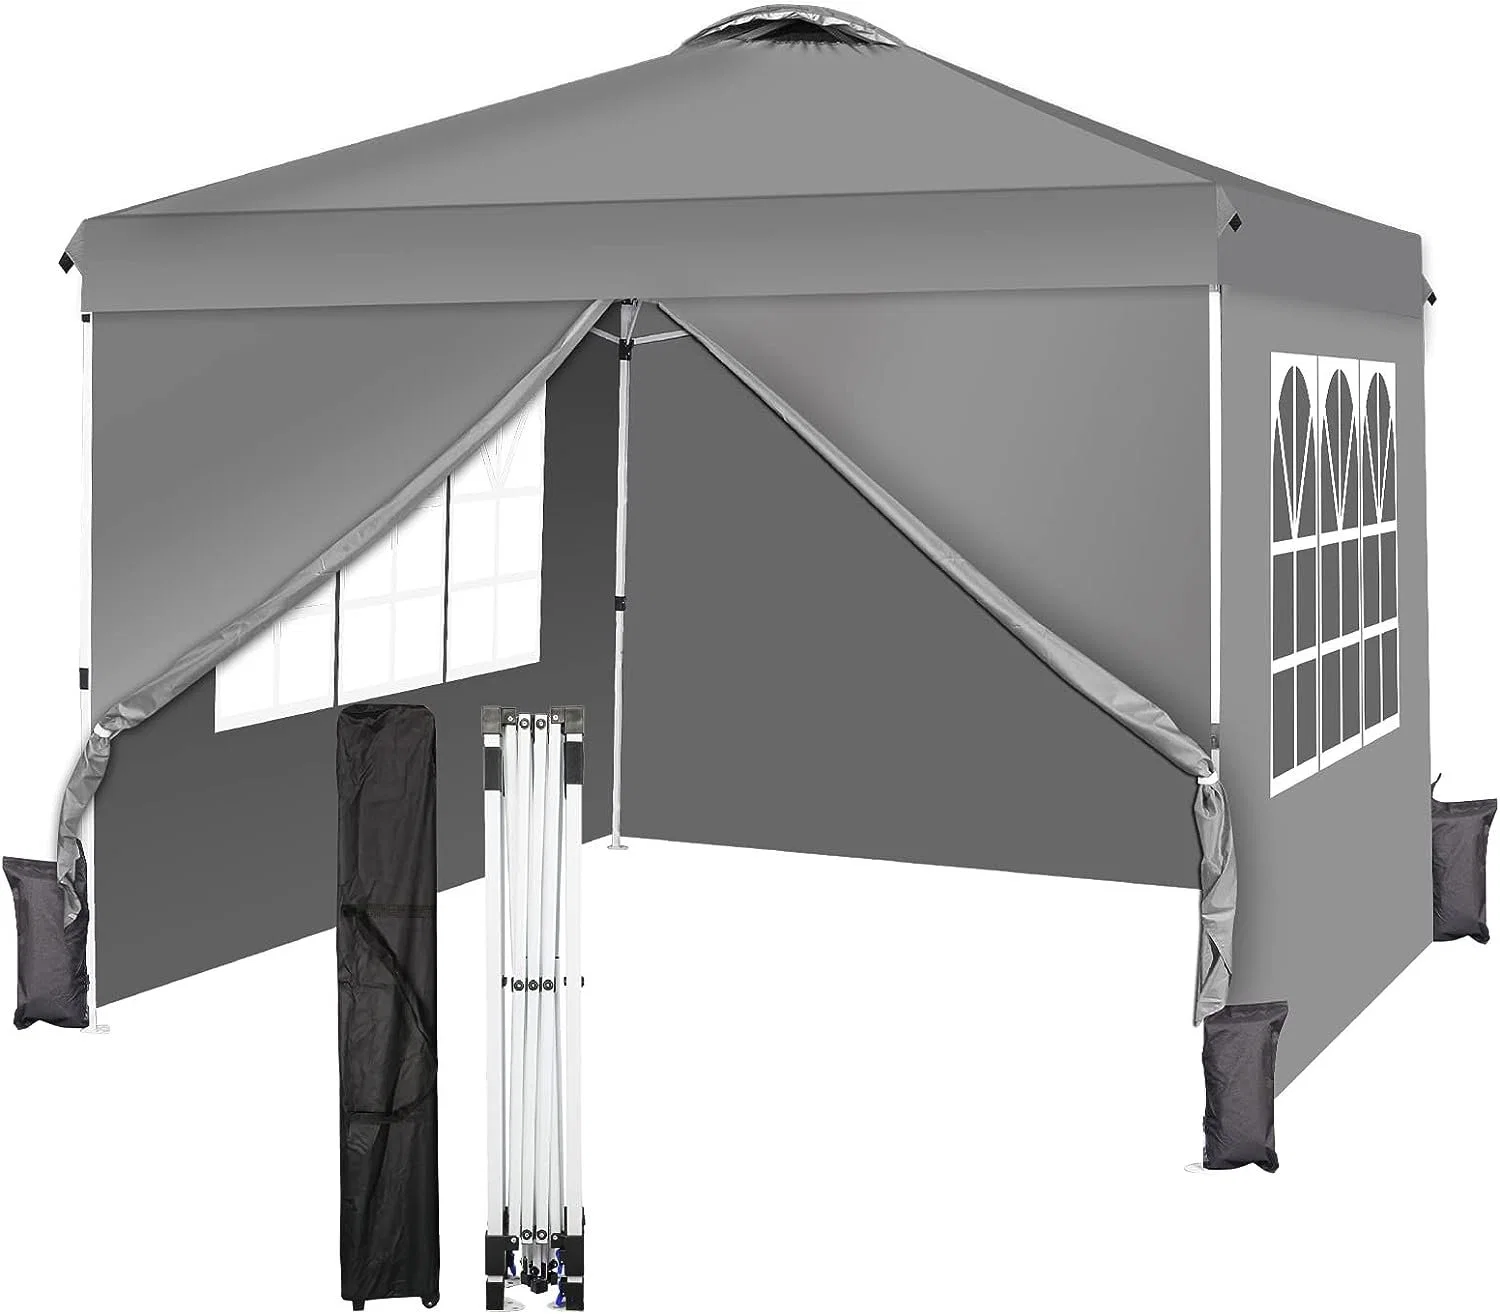 Outdoor Durable Waterproof Iron Pole Cheapest Price Small Size 3X3m Gazebo Tent